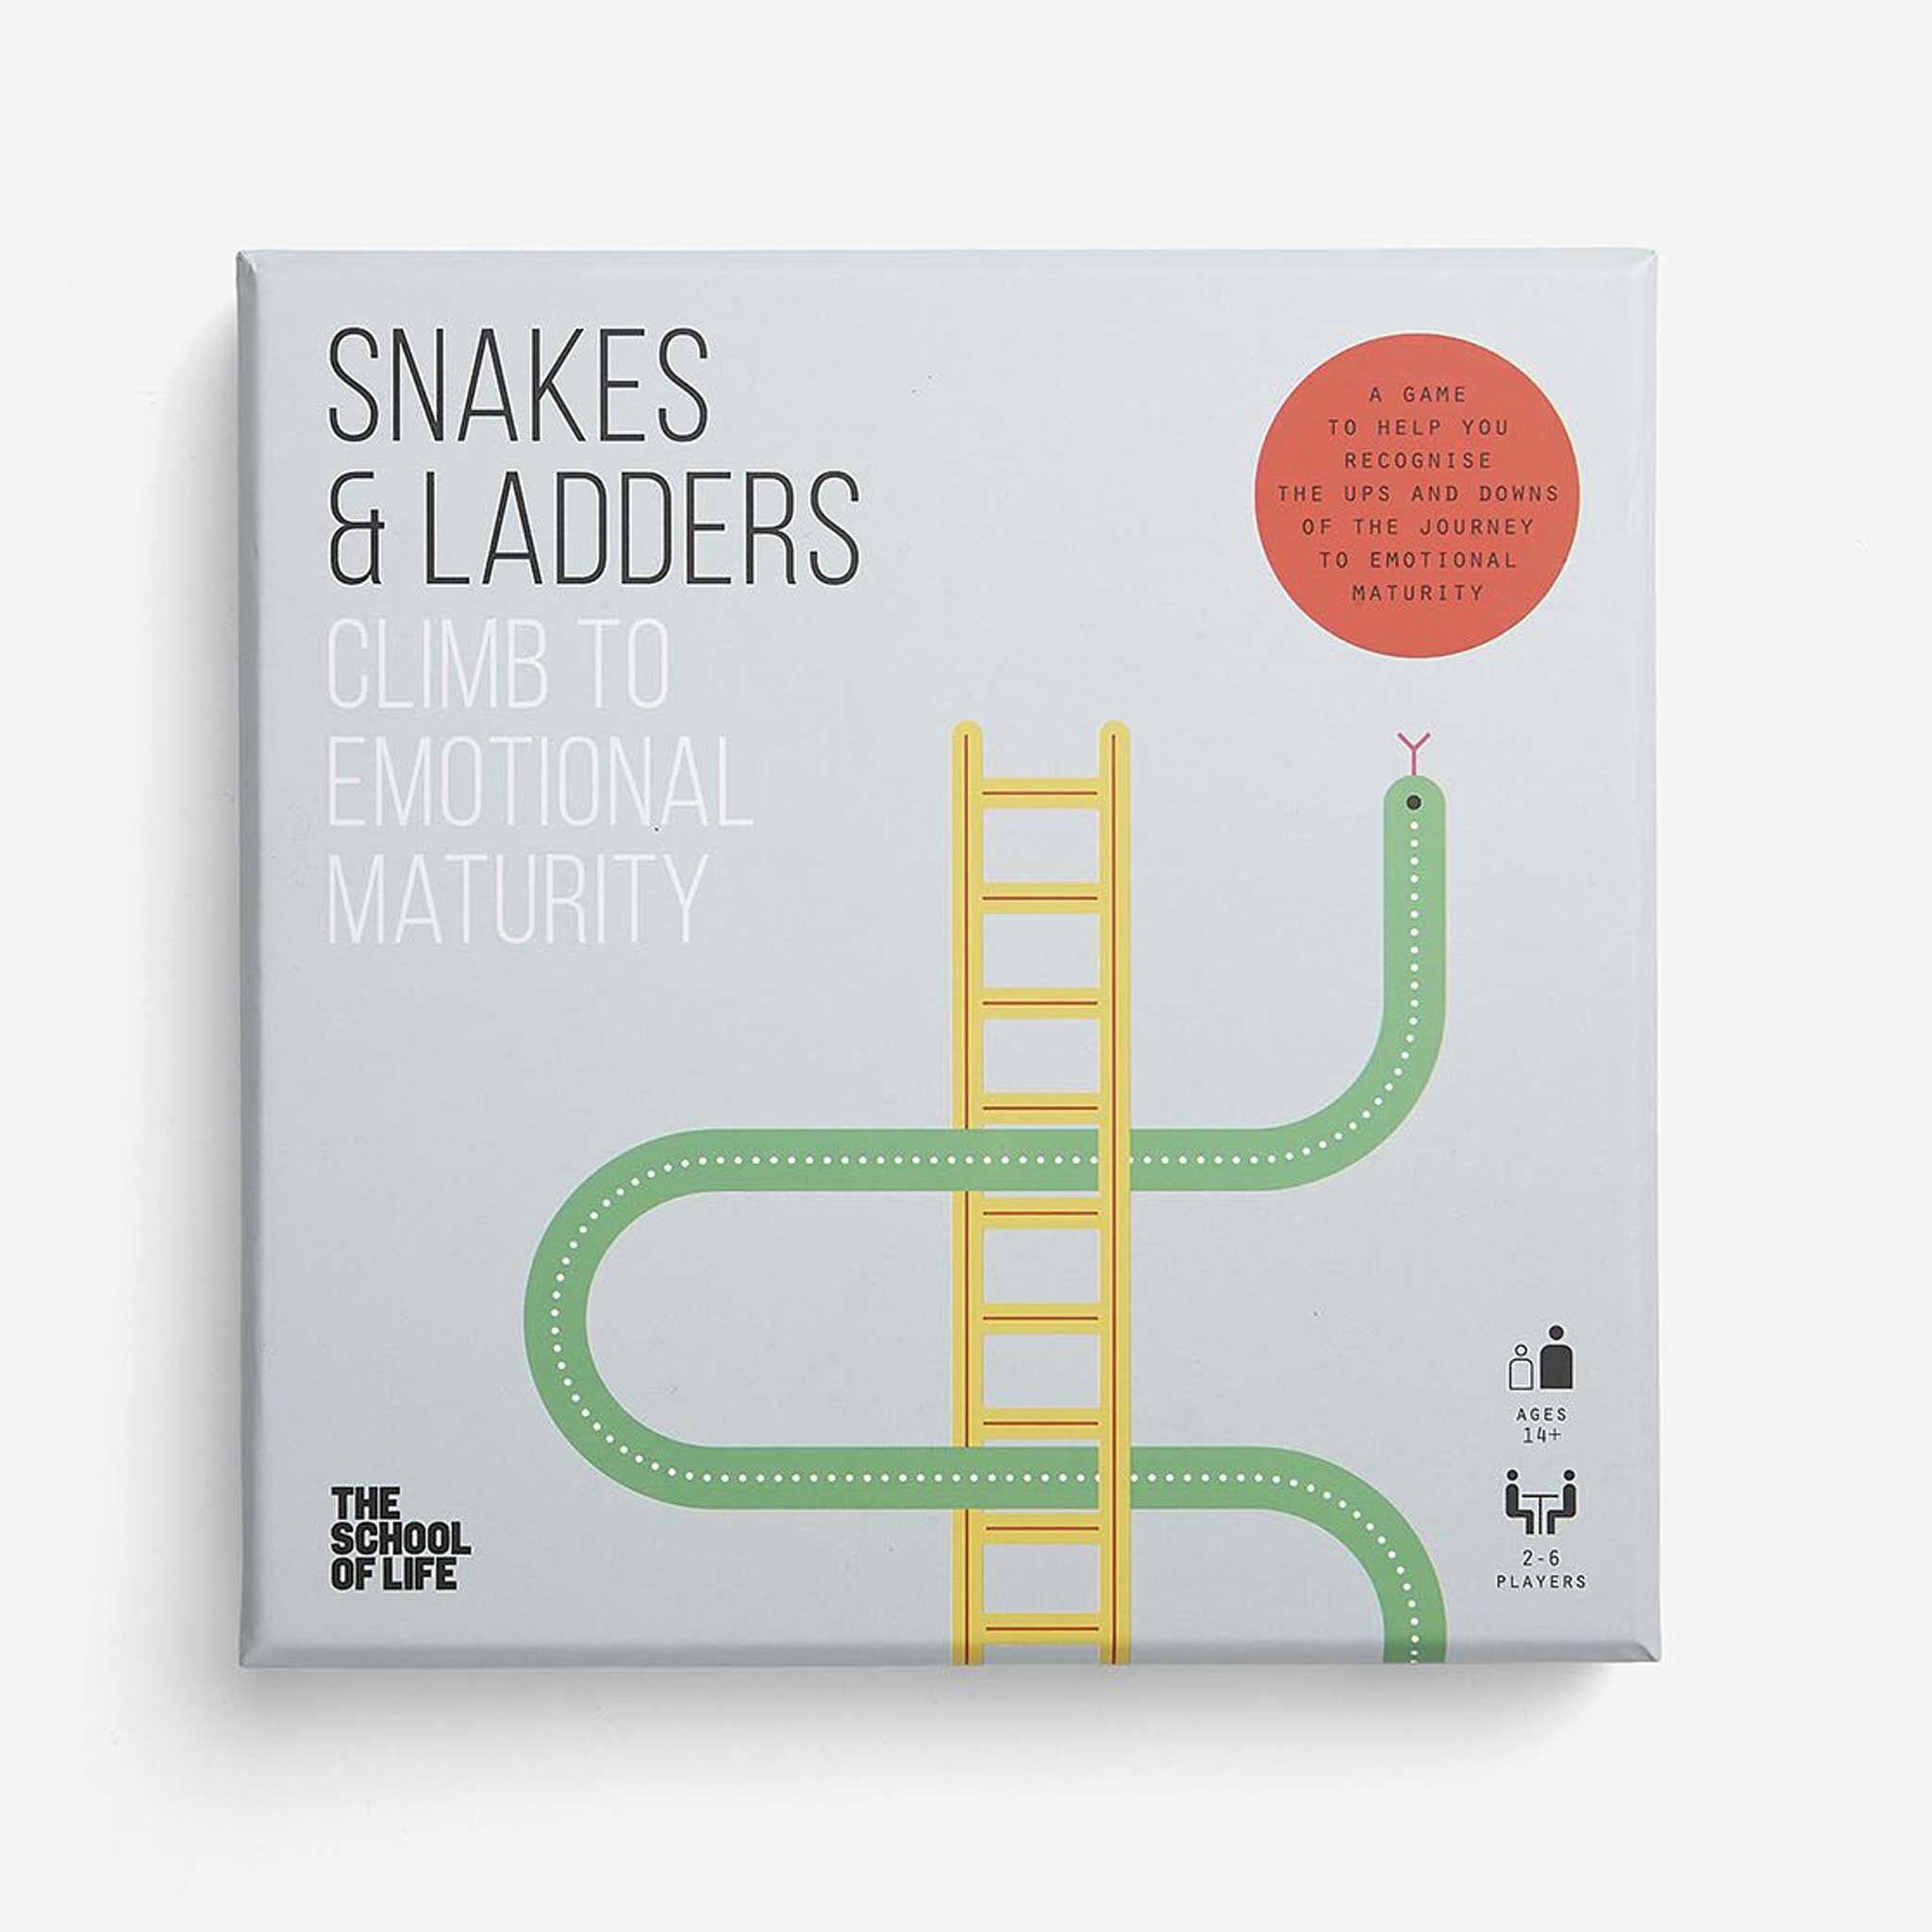 SNAKES & LADDERS | Climb to Emotional Maturity | englischsprachiges SPIEL | The School of Life